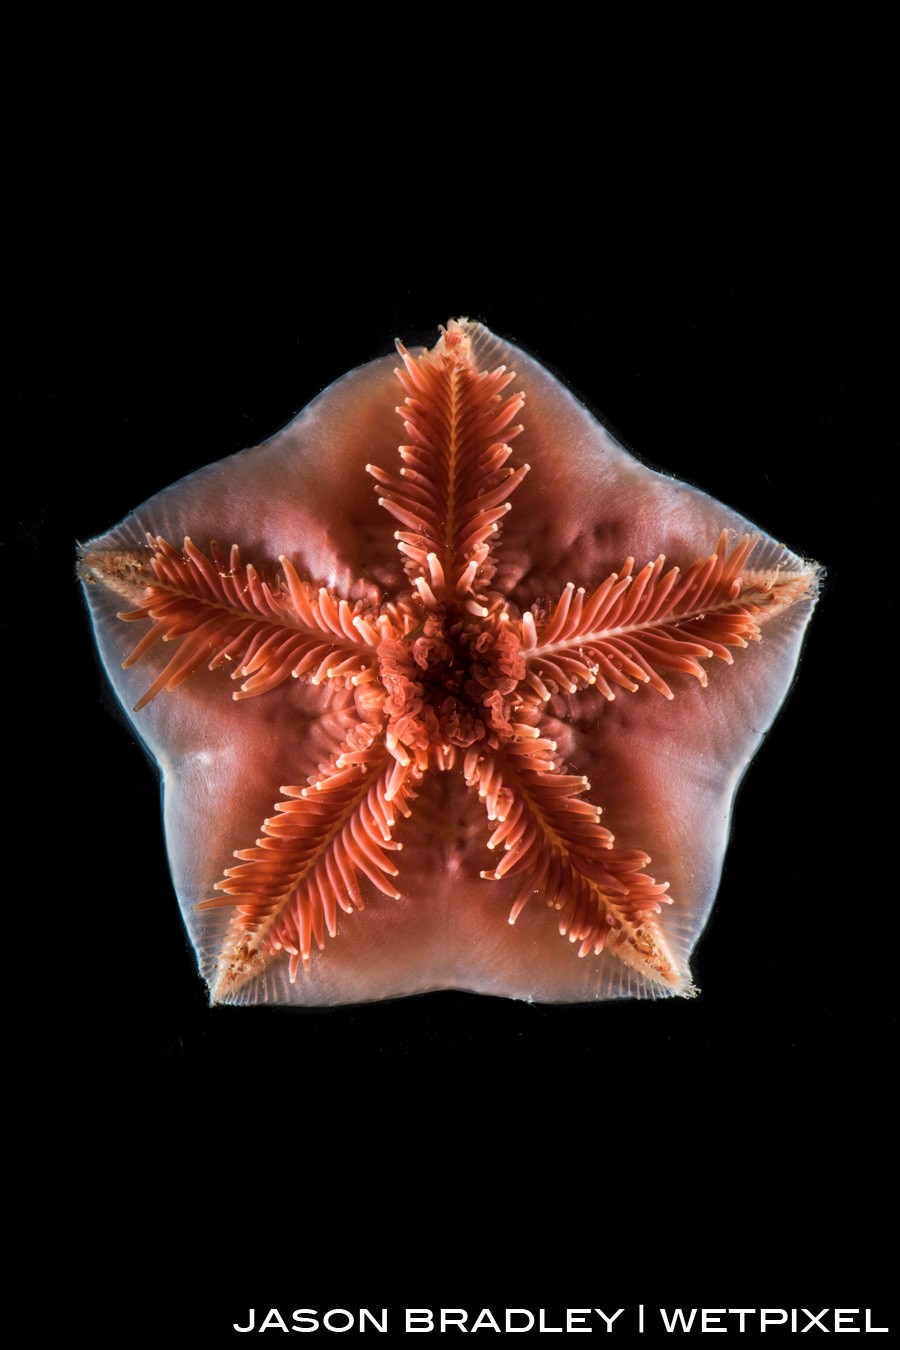 A deep-sea seastar (*Asteroidea*) recovered from 2000 meters.